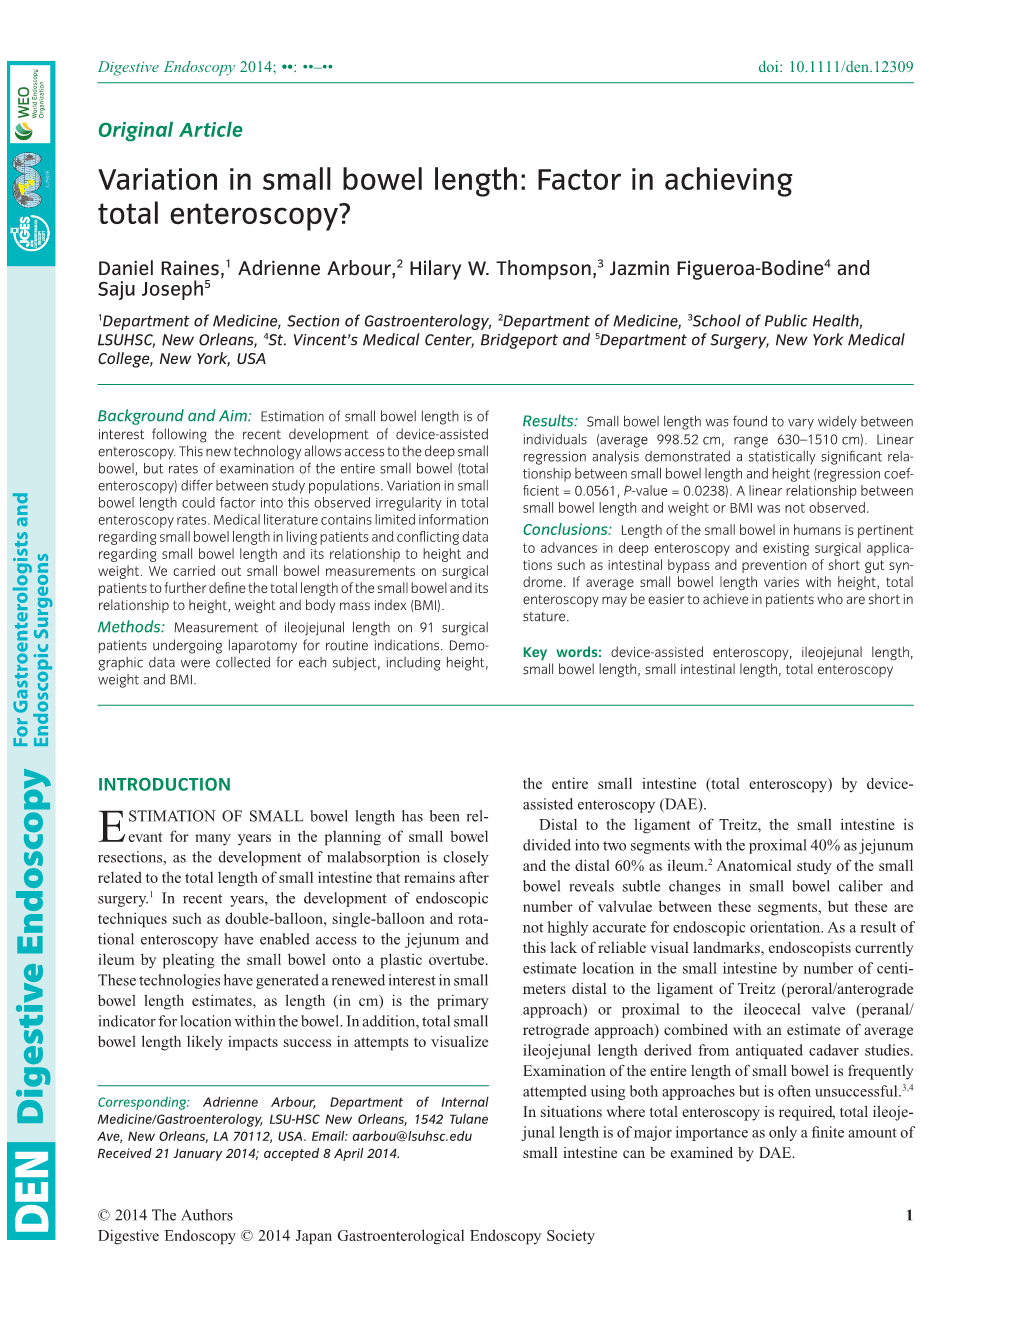 Variation in Small Bowel Length: Factor in Achieving Total Enteroscopy?